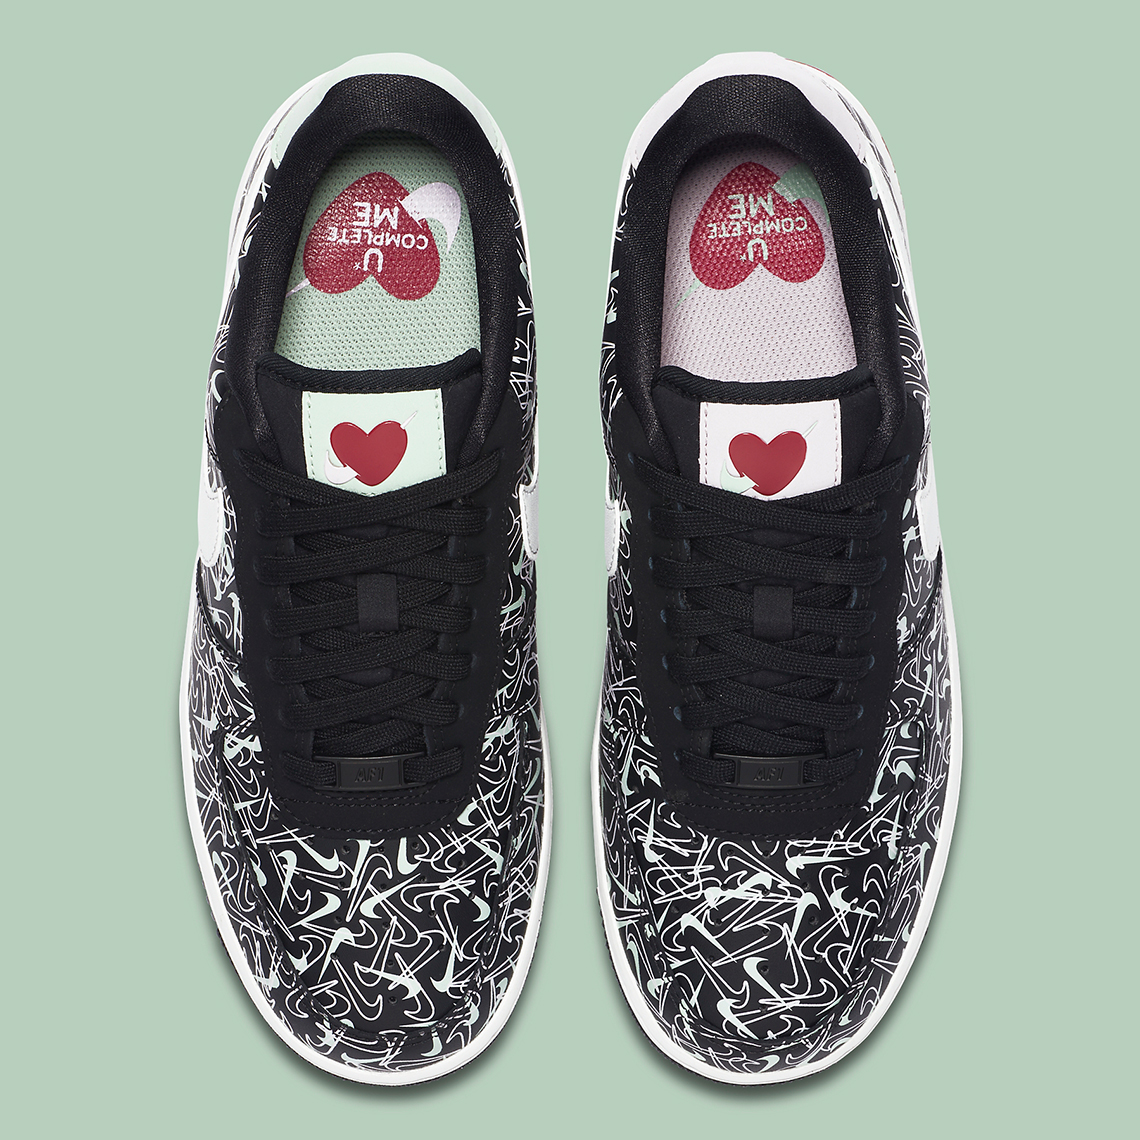 Nike Air Force 1 Low "Valentine's Day" Coming Soon Official Photos